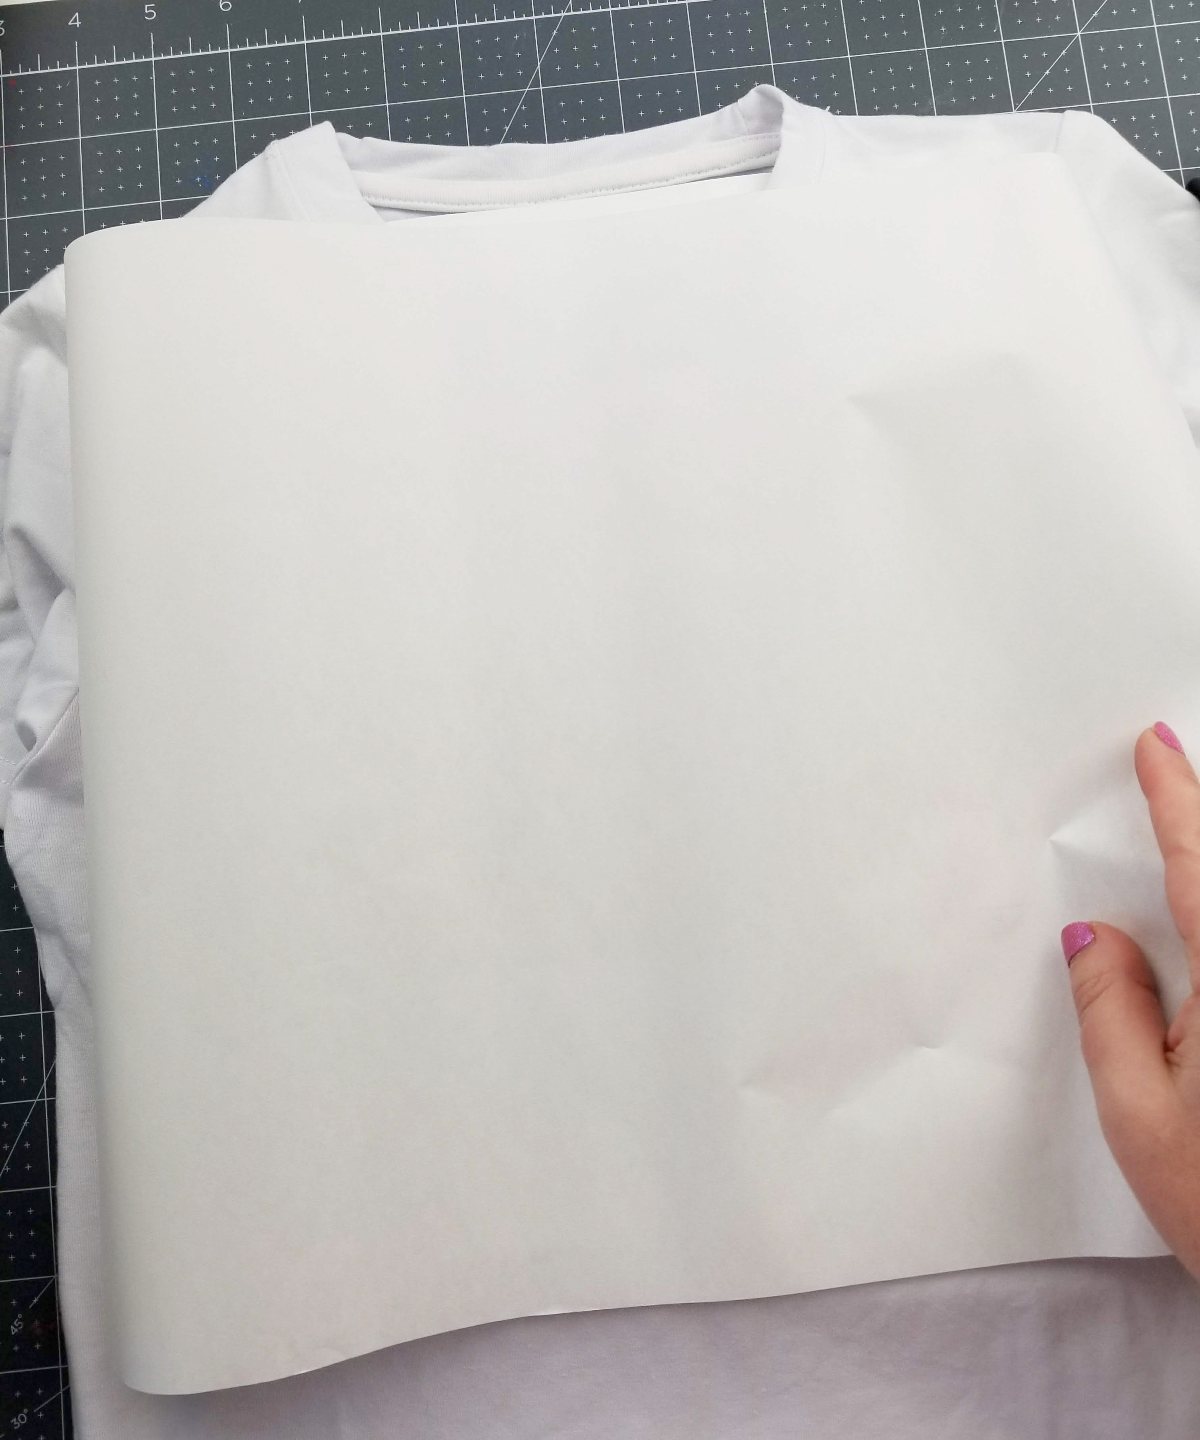 how to use infusible ink on shirt